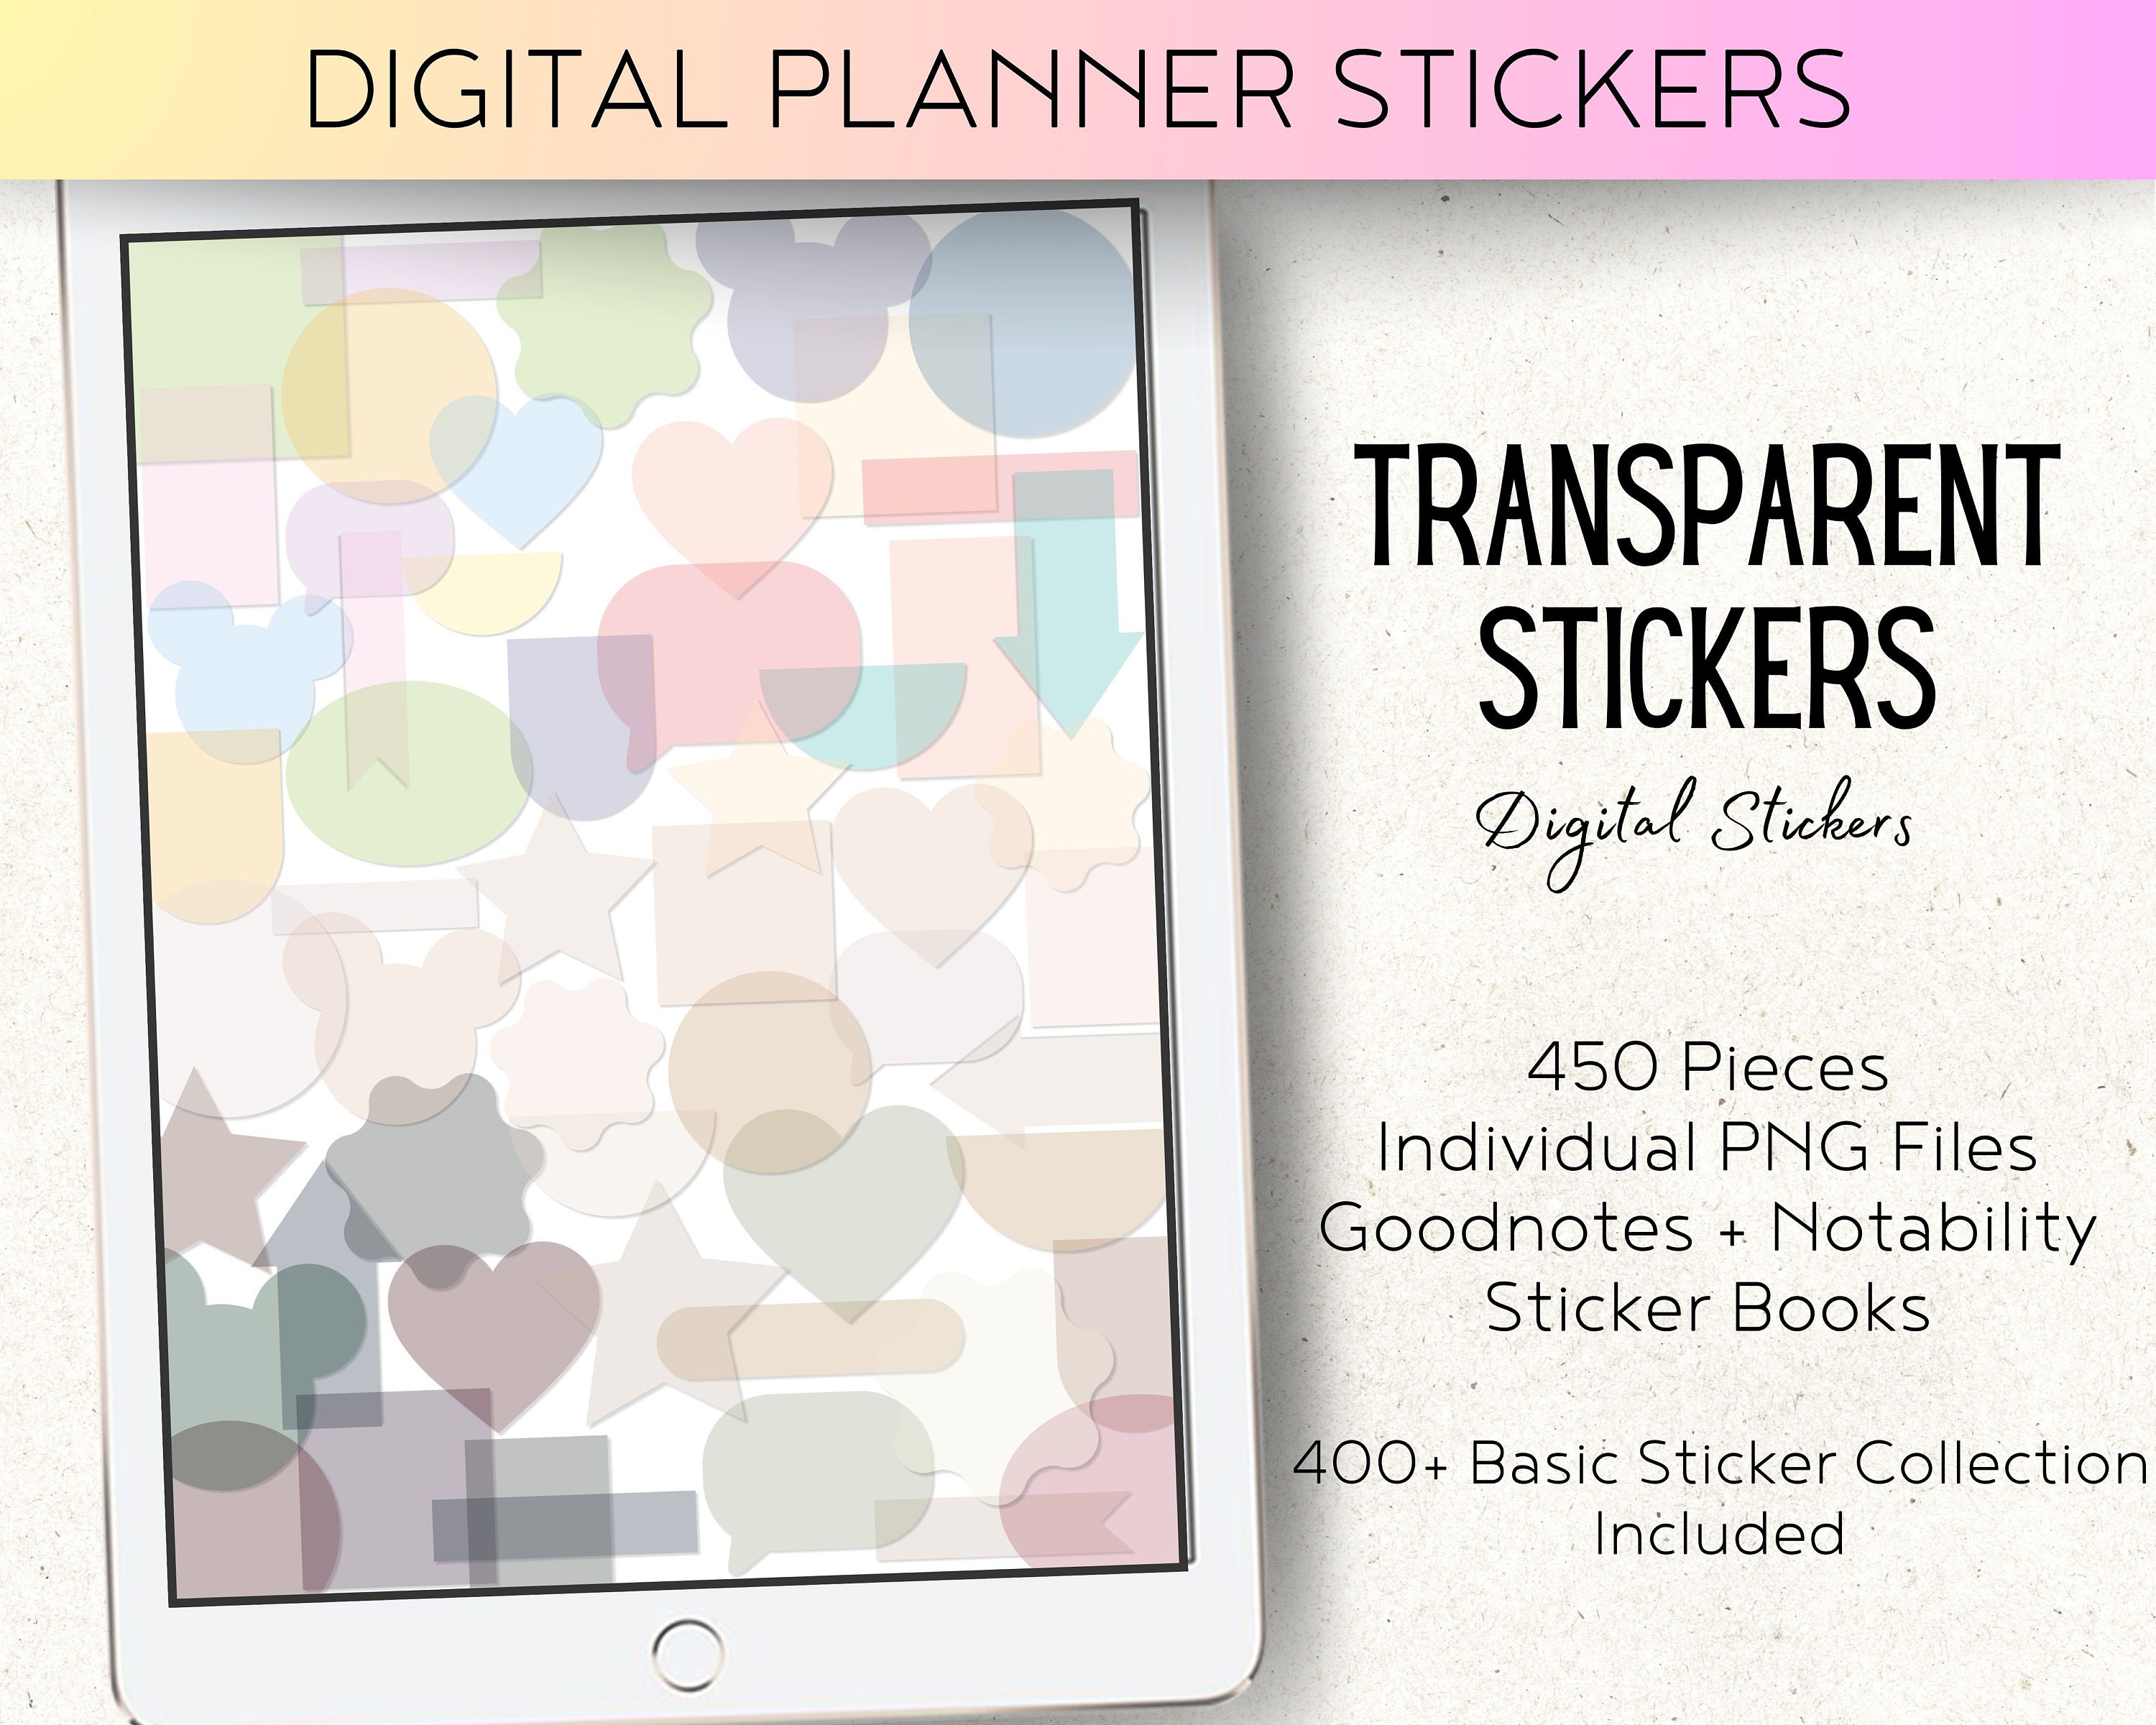 500 Transparent Sticky Notes Set Clear Memo Note Pads Clear Book